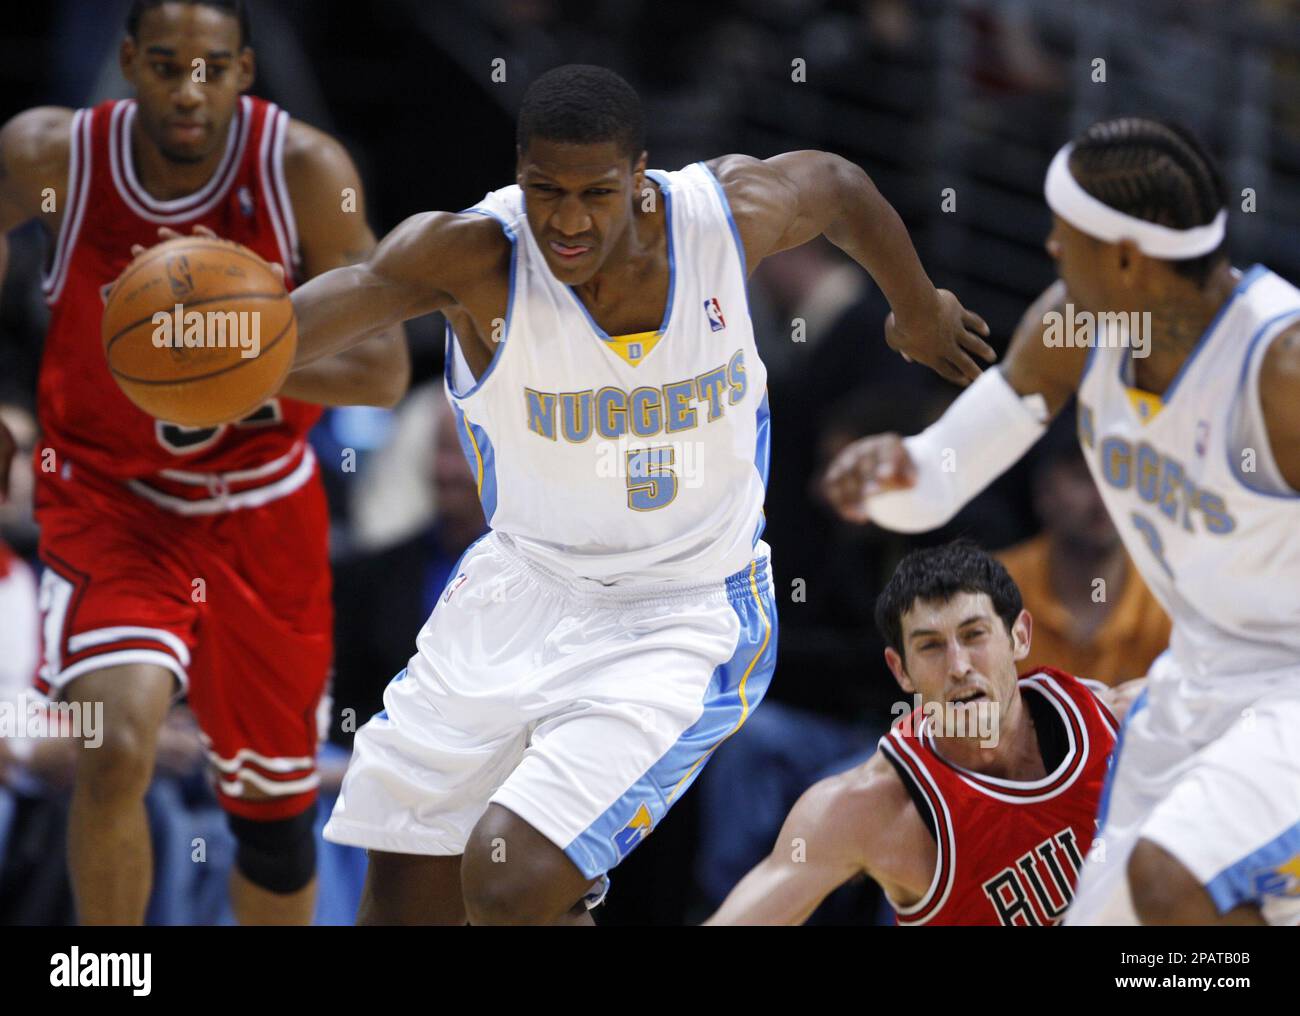 Denver Nuggets forward Yakhouba Diawara, second from left, of France, picks  up a loose ball as Chicago Bulls guards Thomas Gardner, far left, and Kirk  Hinrich, third from left, look on while